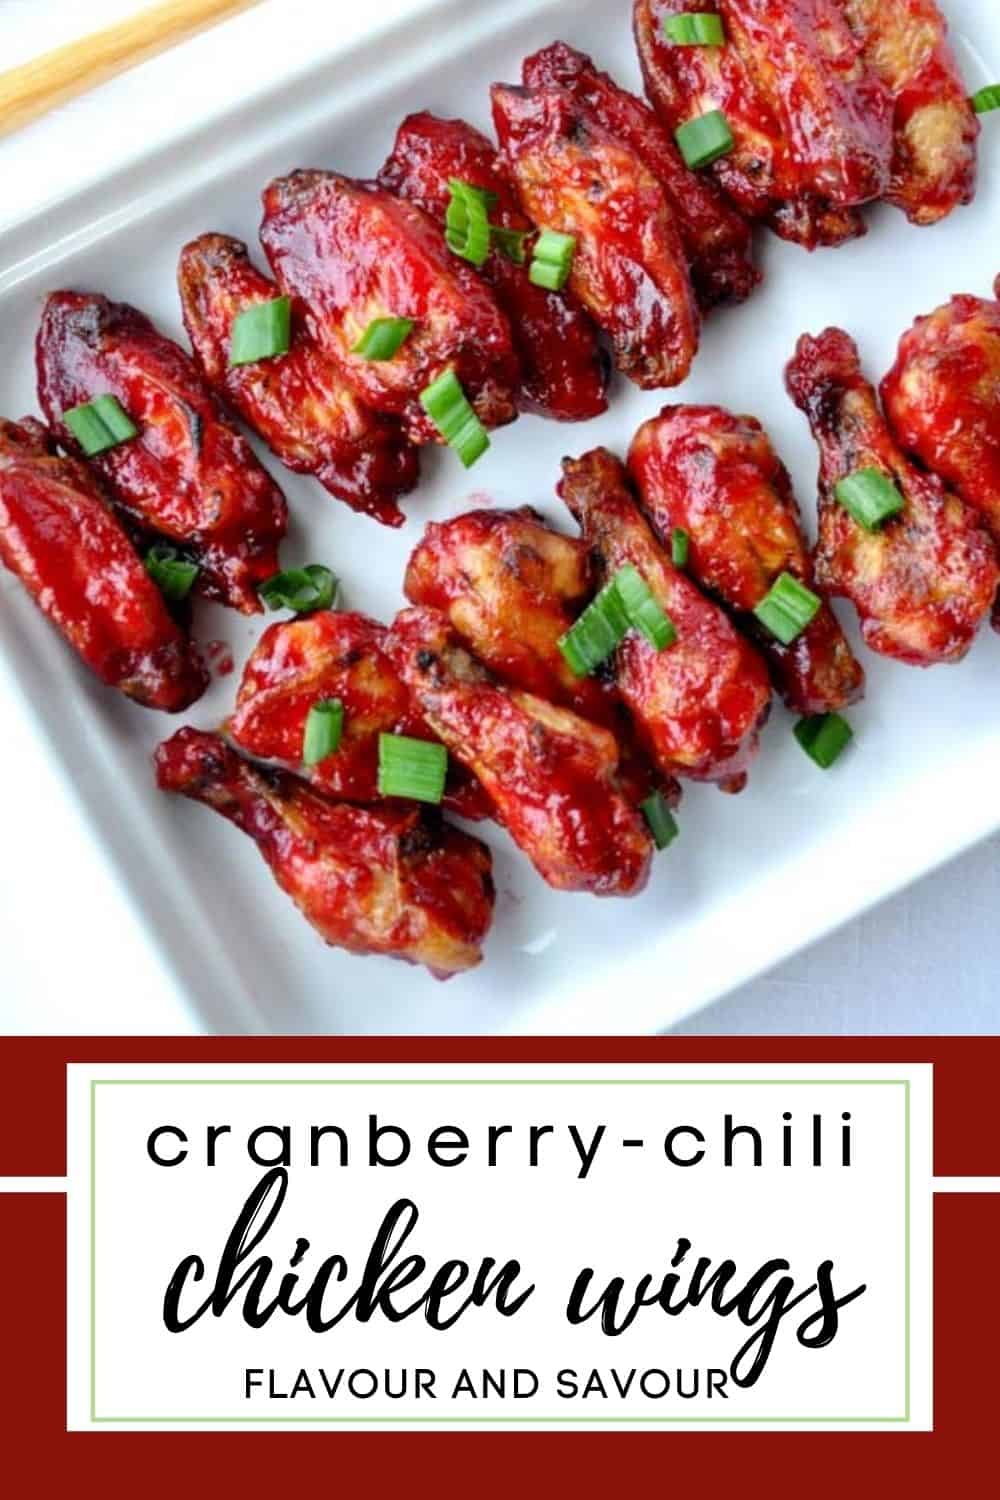  image with text overlay for cranberry glazed chili chicken wings